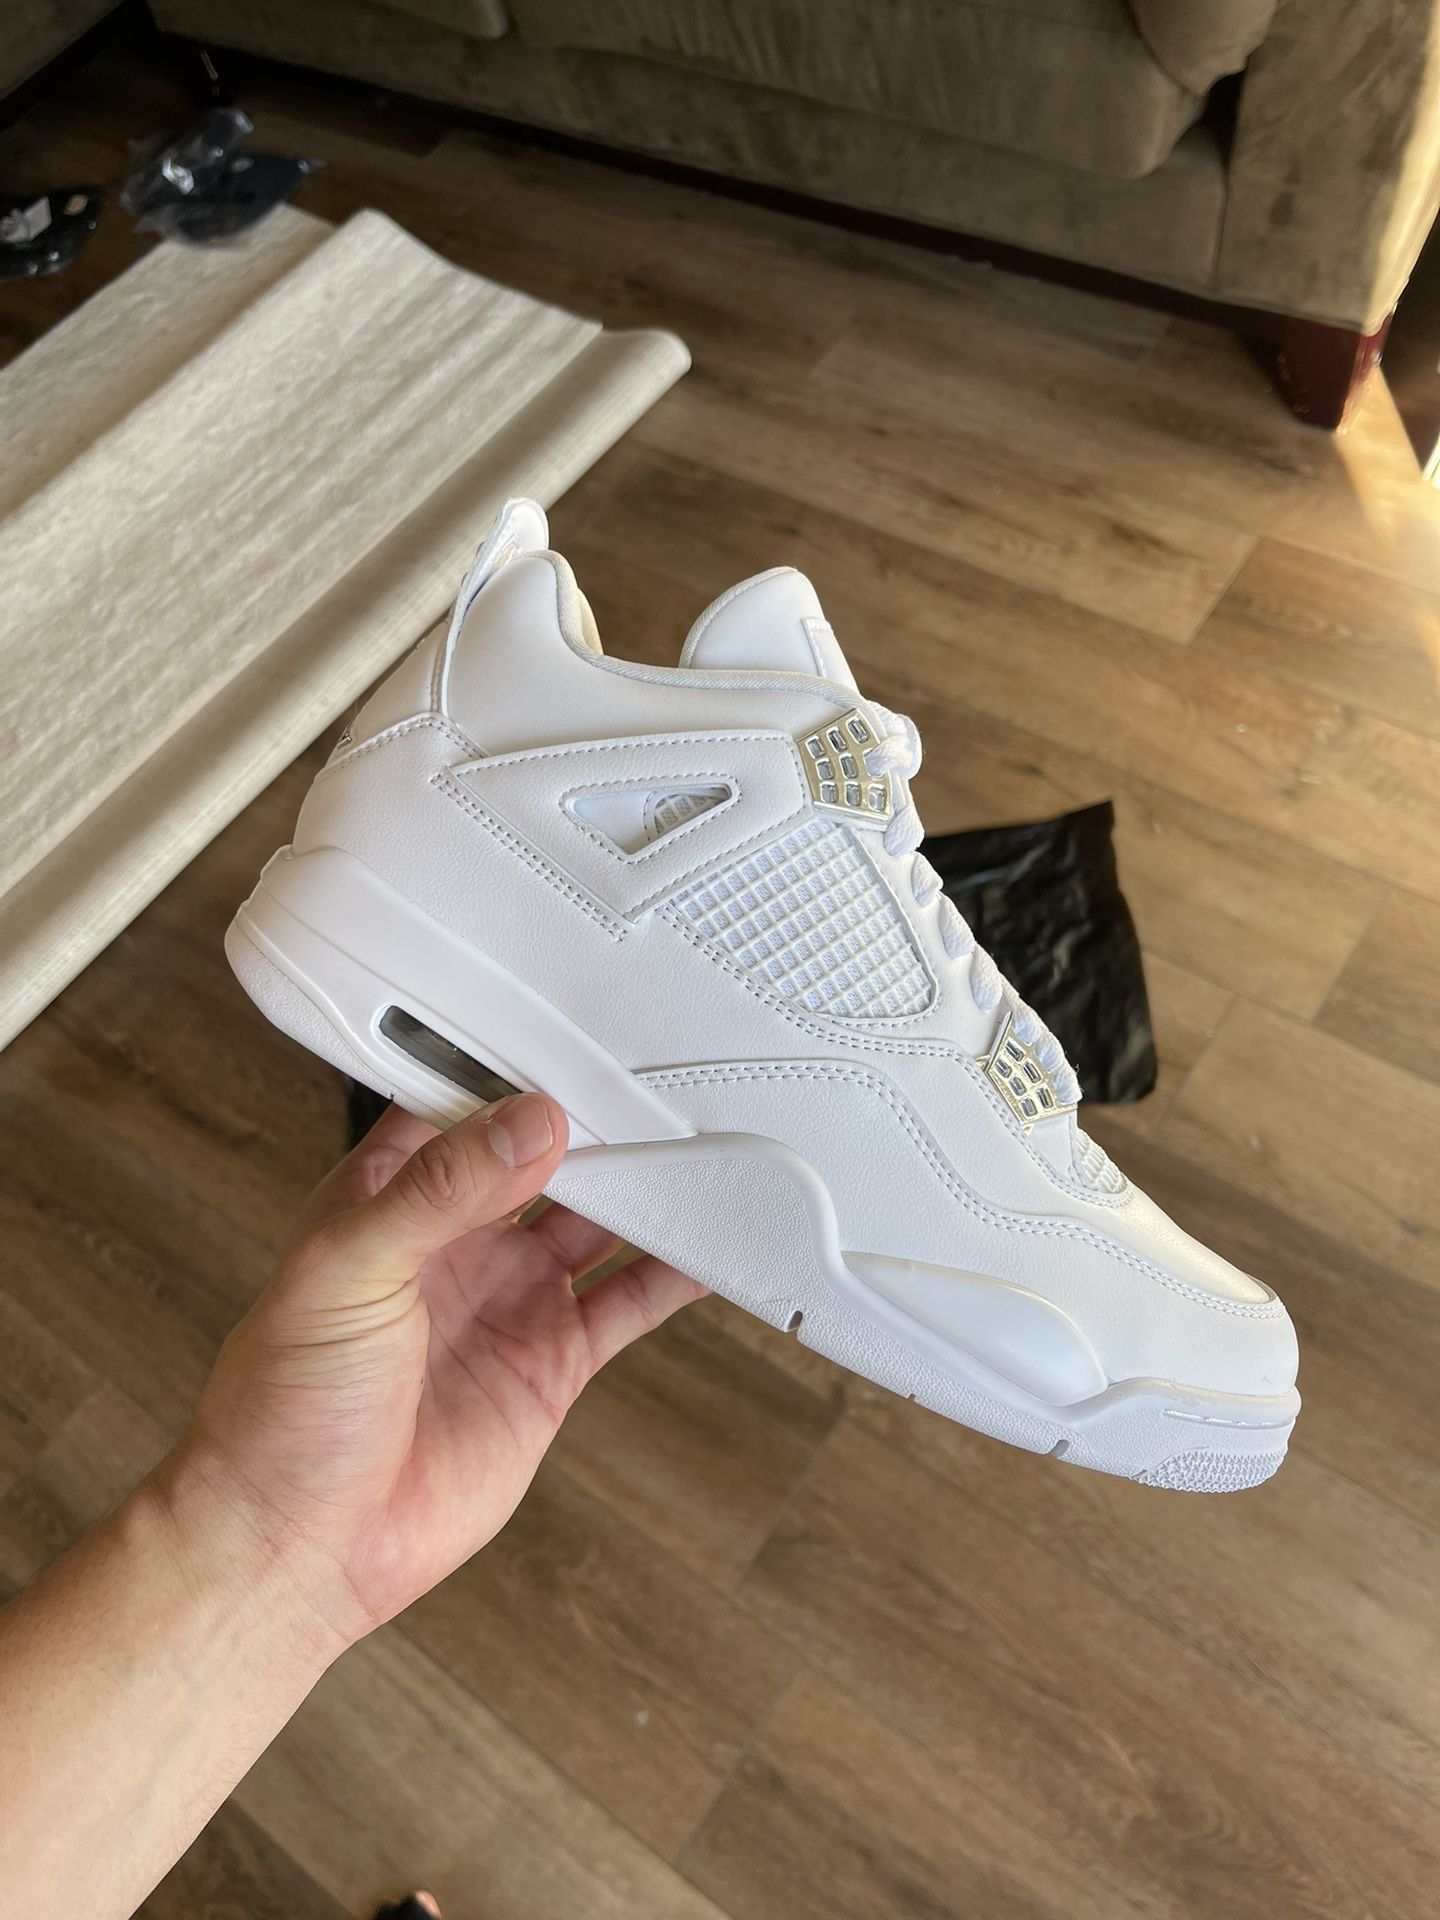 Jordan 4 ‘Pure Money’, 9.5M / 11M Available (check out my page🔥) 